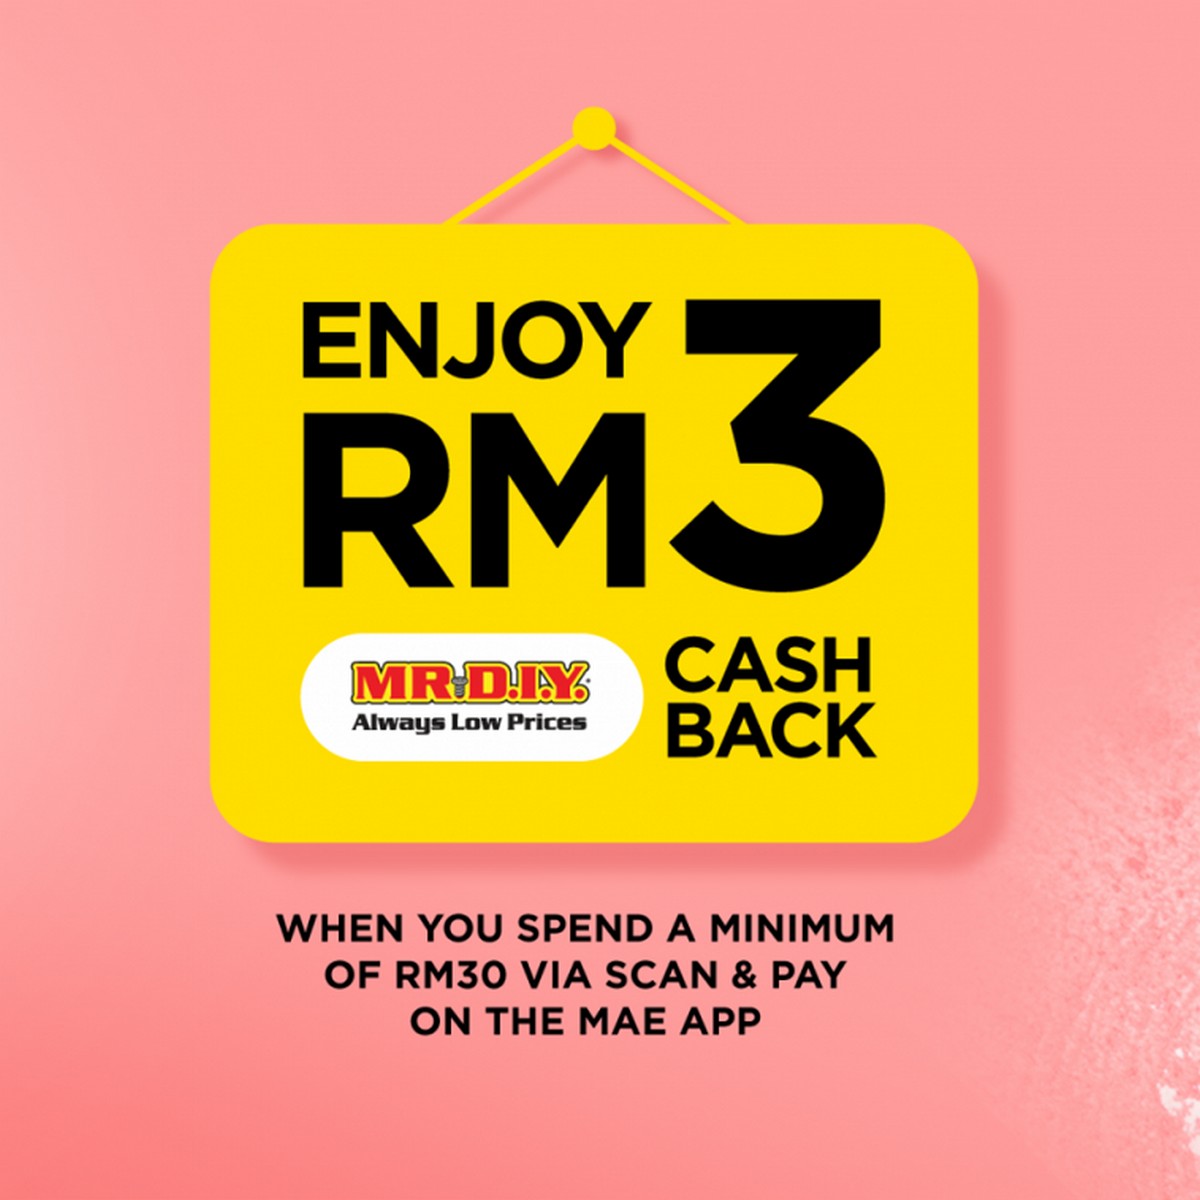 iii.-Use-MAE-e-wallet-to-pay-at-Mr-DIY-to-get-RM3-cash-rebate - News 